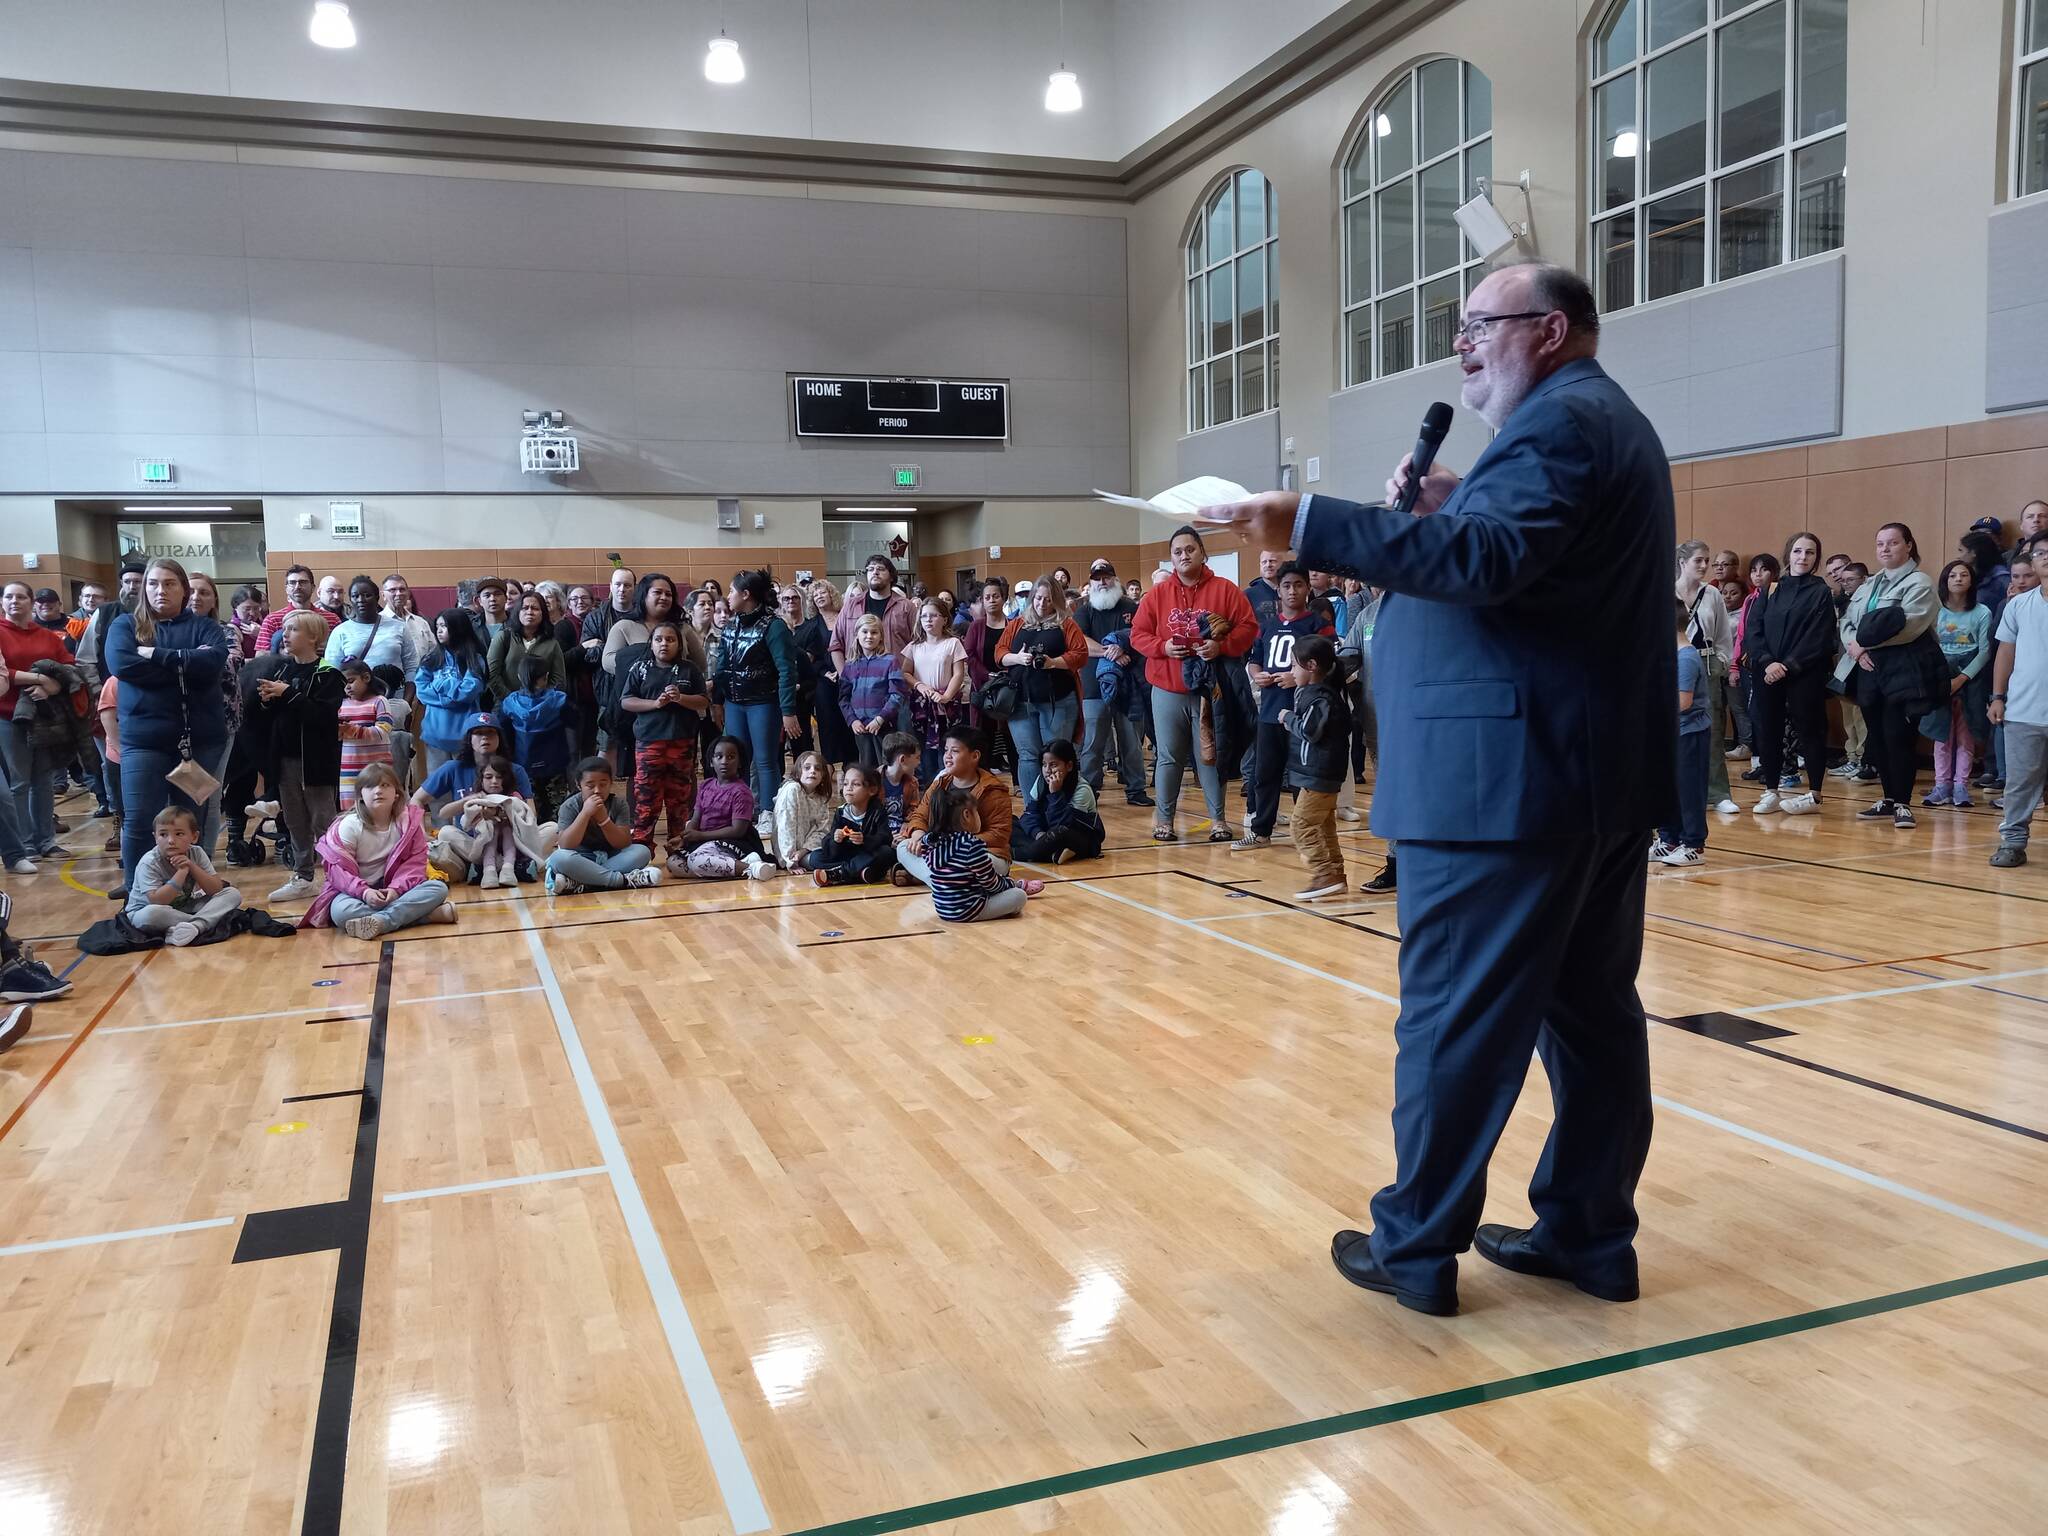 Photos by ROBERT WHALE, Auburn Reporter
Auburn School District Superintendent Dr. Alan Spicciati addresses attendees of the grand opening of Terminal Park Elementary School on Sept. 26.